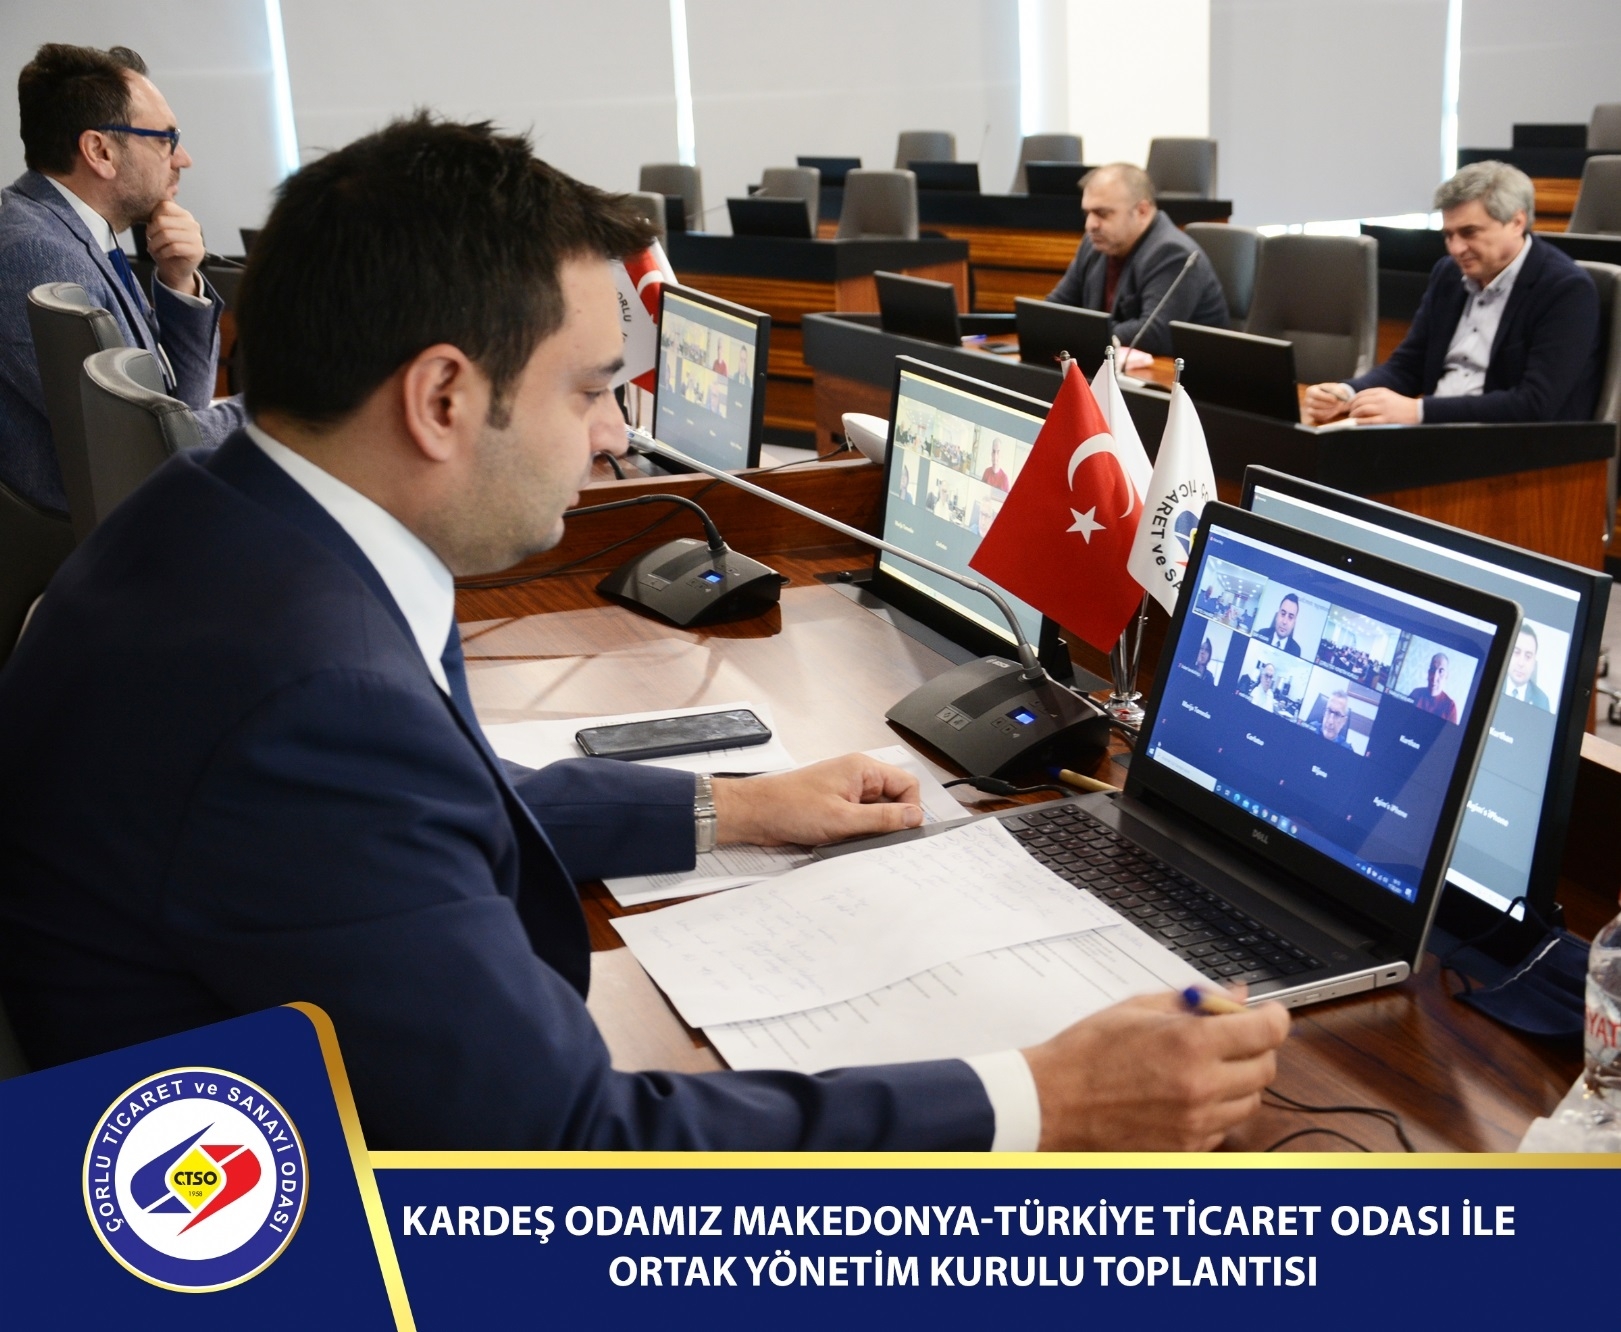 We Held A Joint Board Meeting With Macedonia-Turkey Chamber Of Commerce